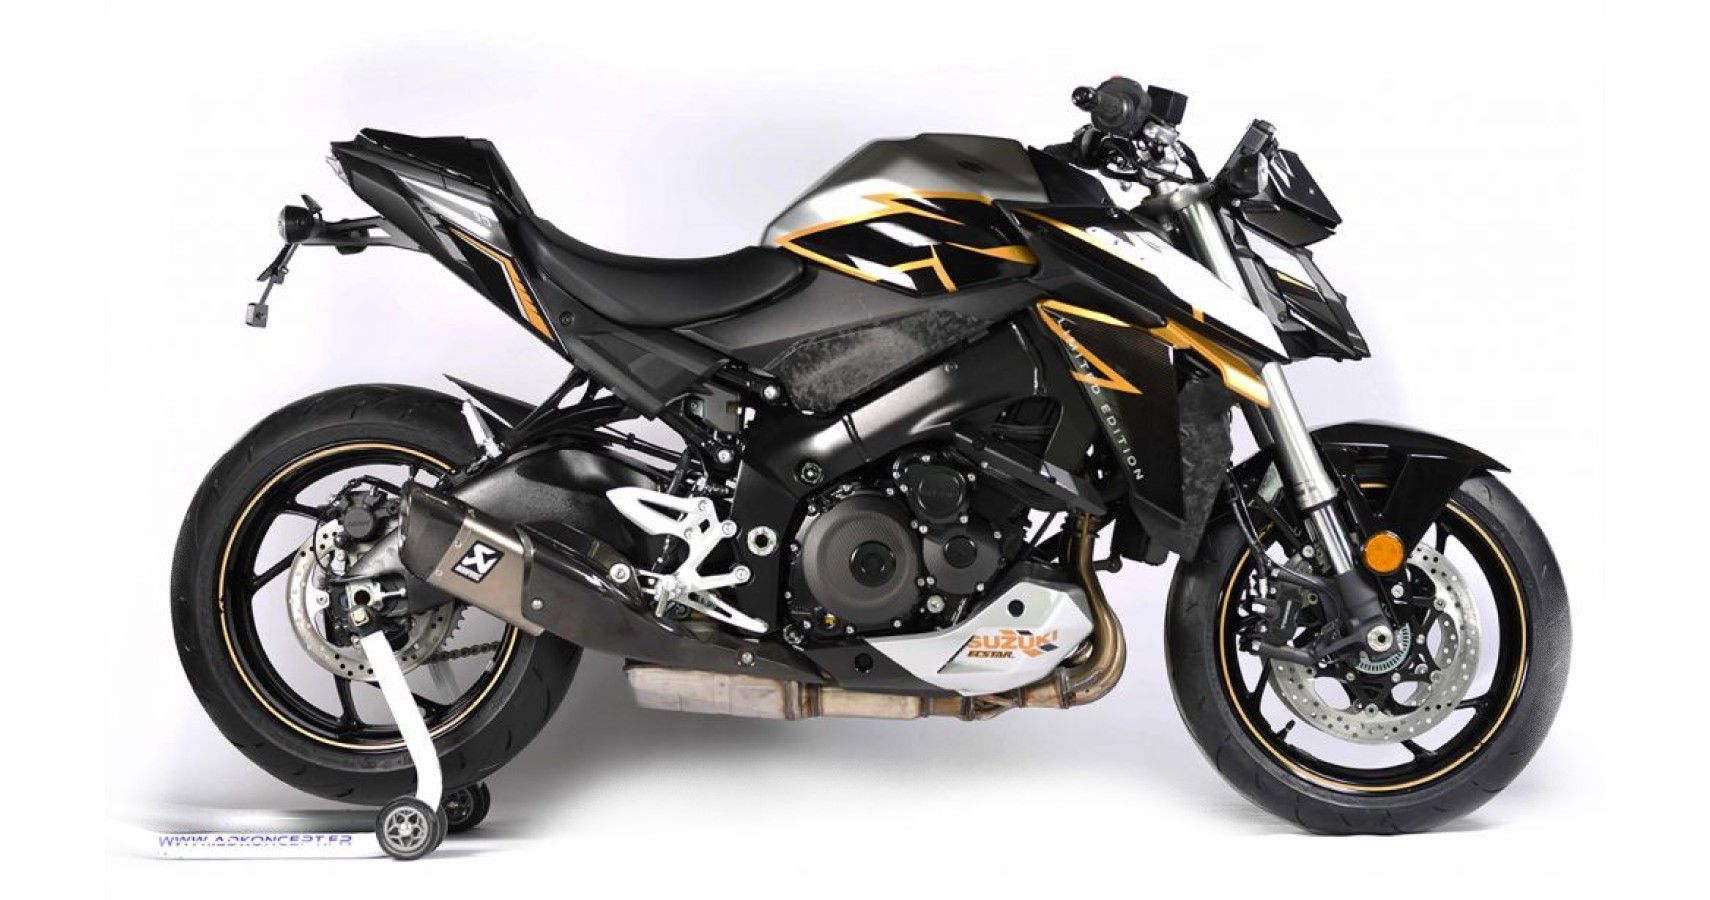 Check Out The French-Special Limited Edition AD Koncept Suzuki GSX-S950 R